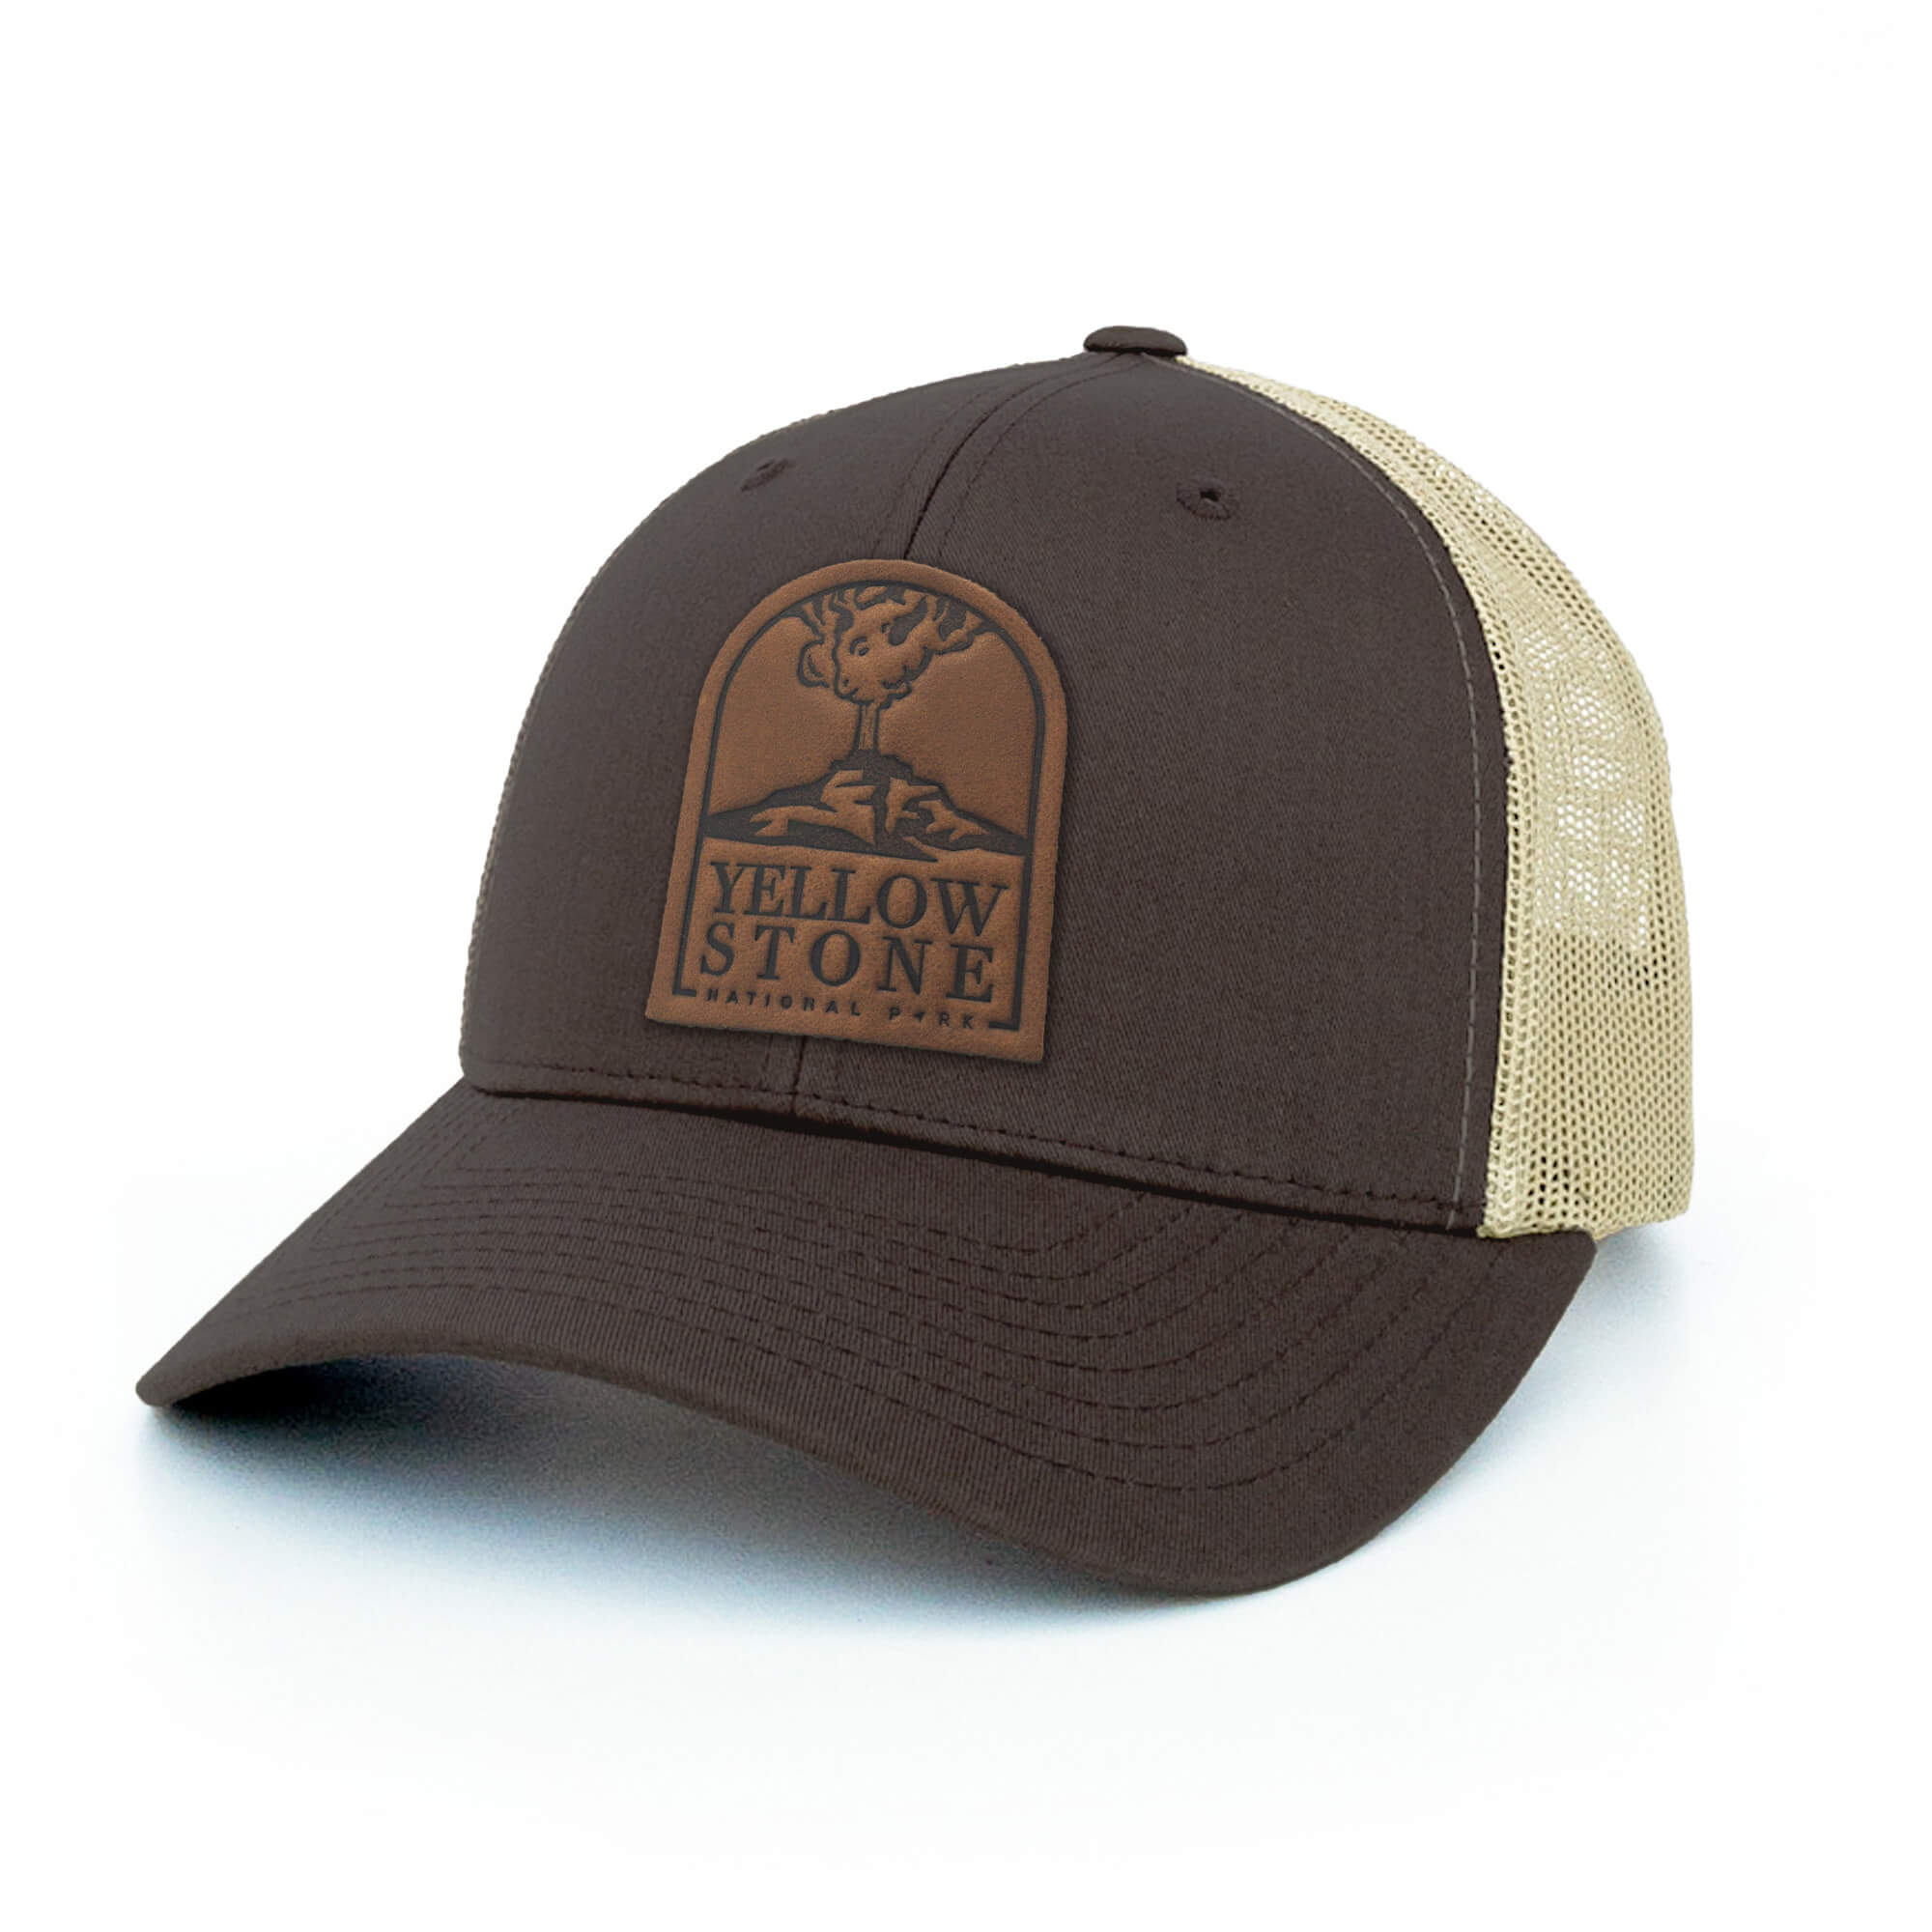 Brown and khaki trucker hat with full-grain leather patch of Yellowstone National Park | BLACK-007-005, CHARC-007-005, NAVY-007-005, HGREY-007-005, MOSS-007-005, BROWN-007-005